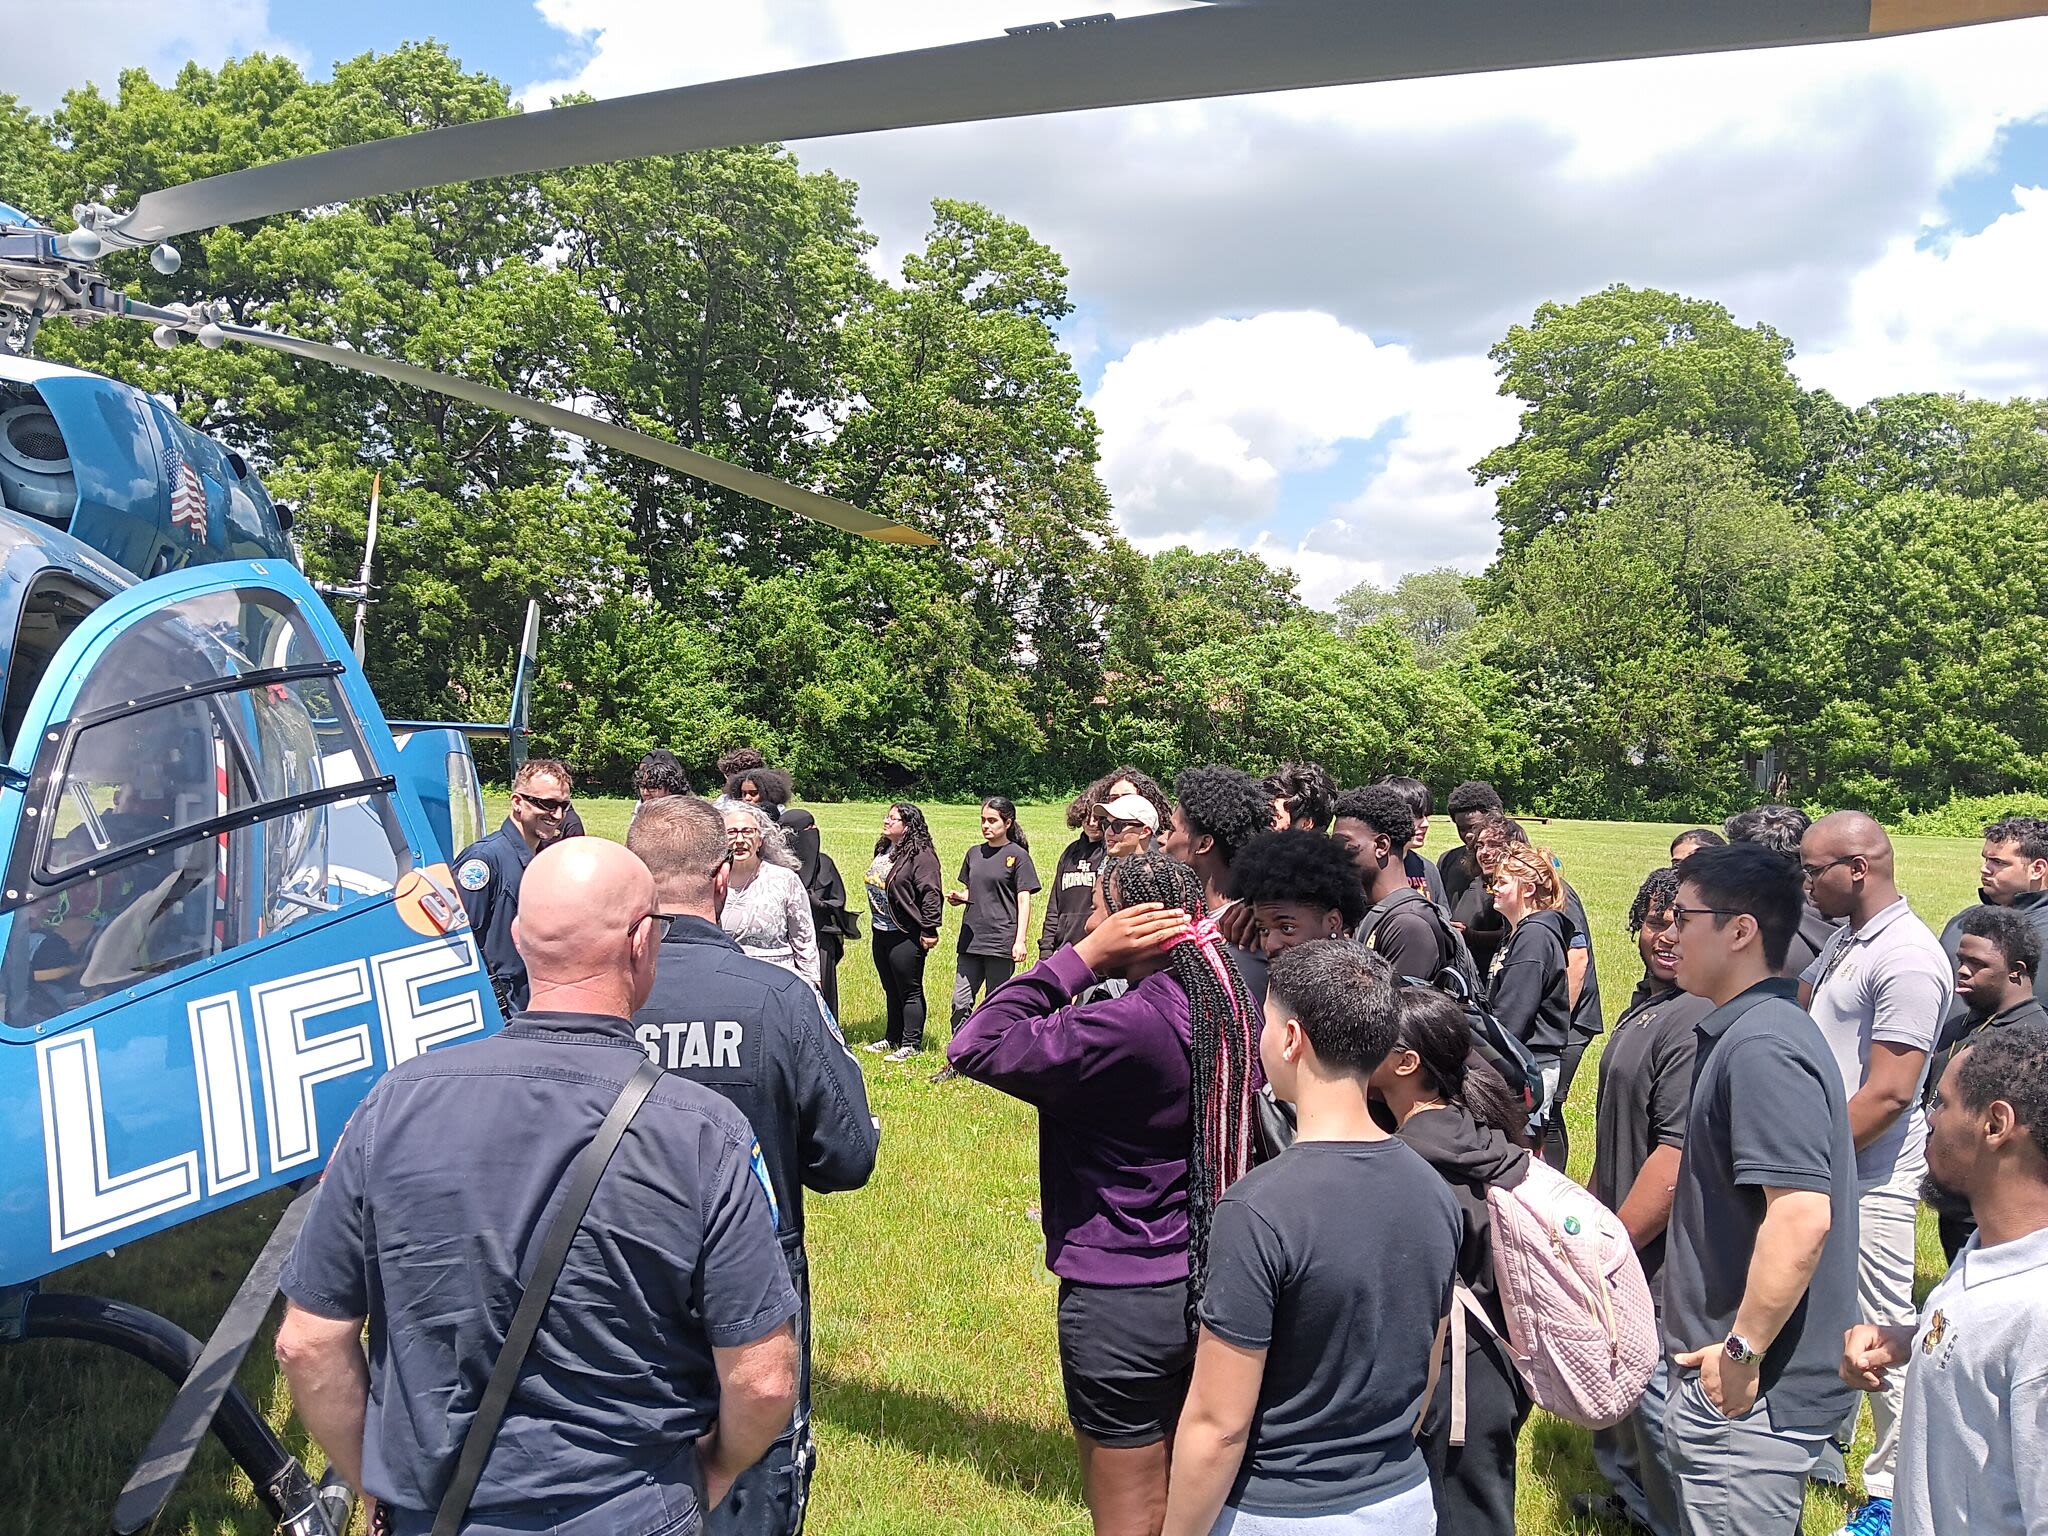 LifeStar visit to a CT high school culminates first year for school's medical responder course